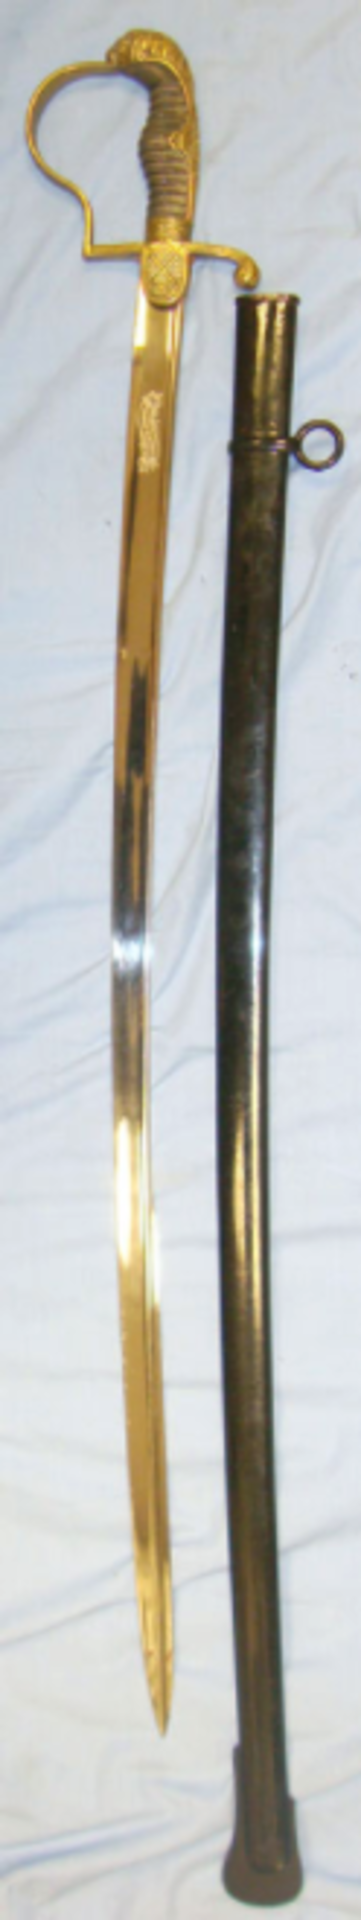 Superior Quality, Imperial German/ Armies Of The Reich Artillery Officer's Long Dress Sword With '